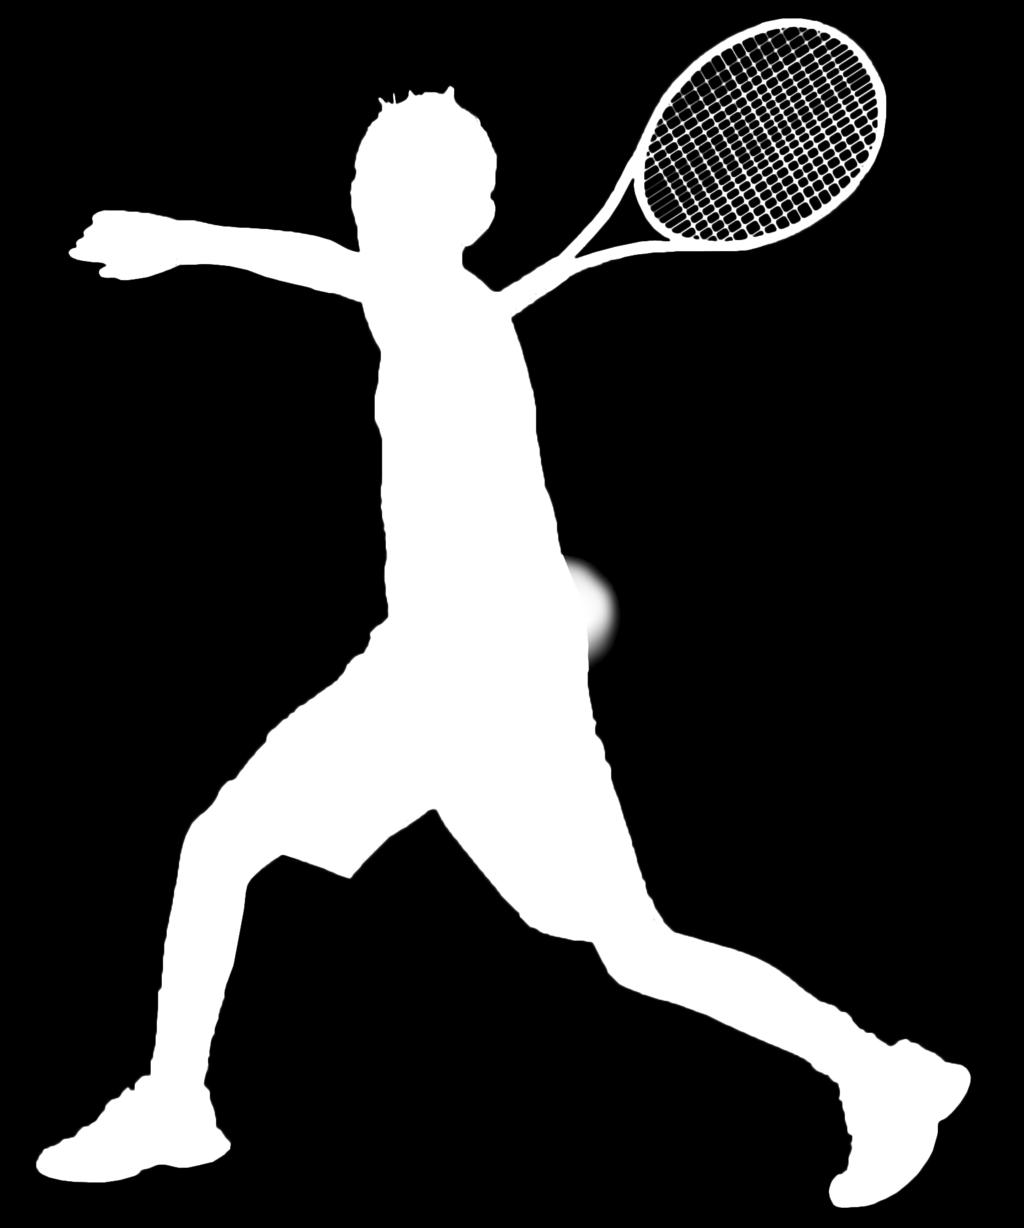 13 weeks A new version of our famous tennis program. Elite Team Tennis includes 13 hours of training, 2 home practices, and 1 meet with the other Elite clubs.